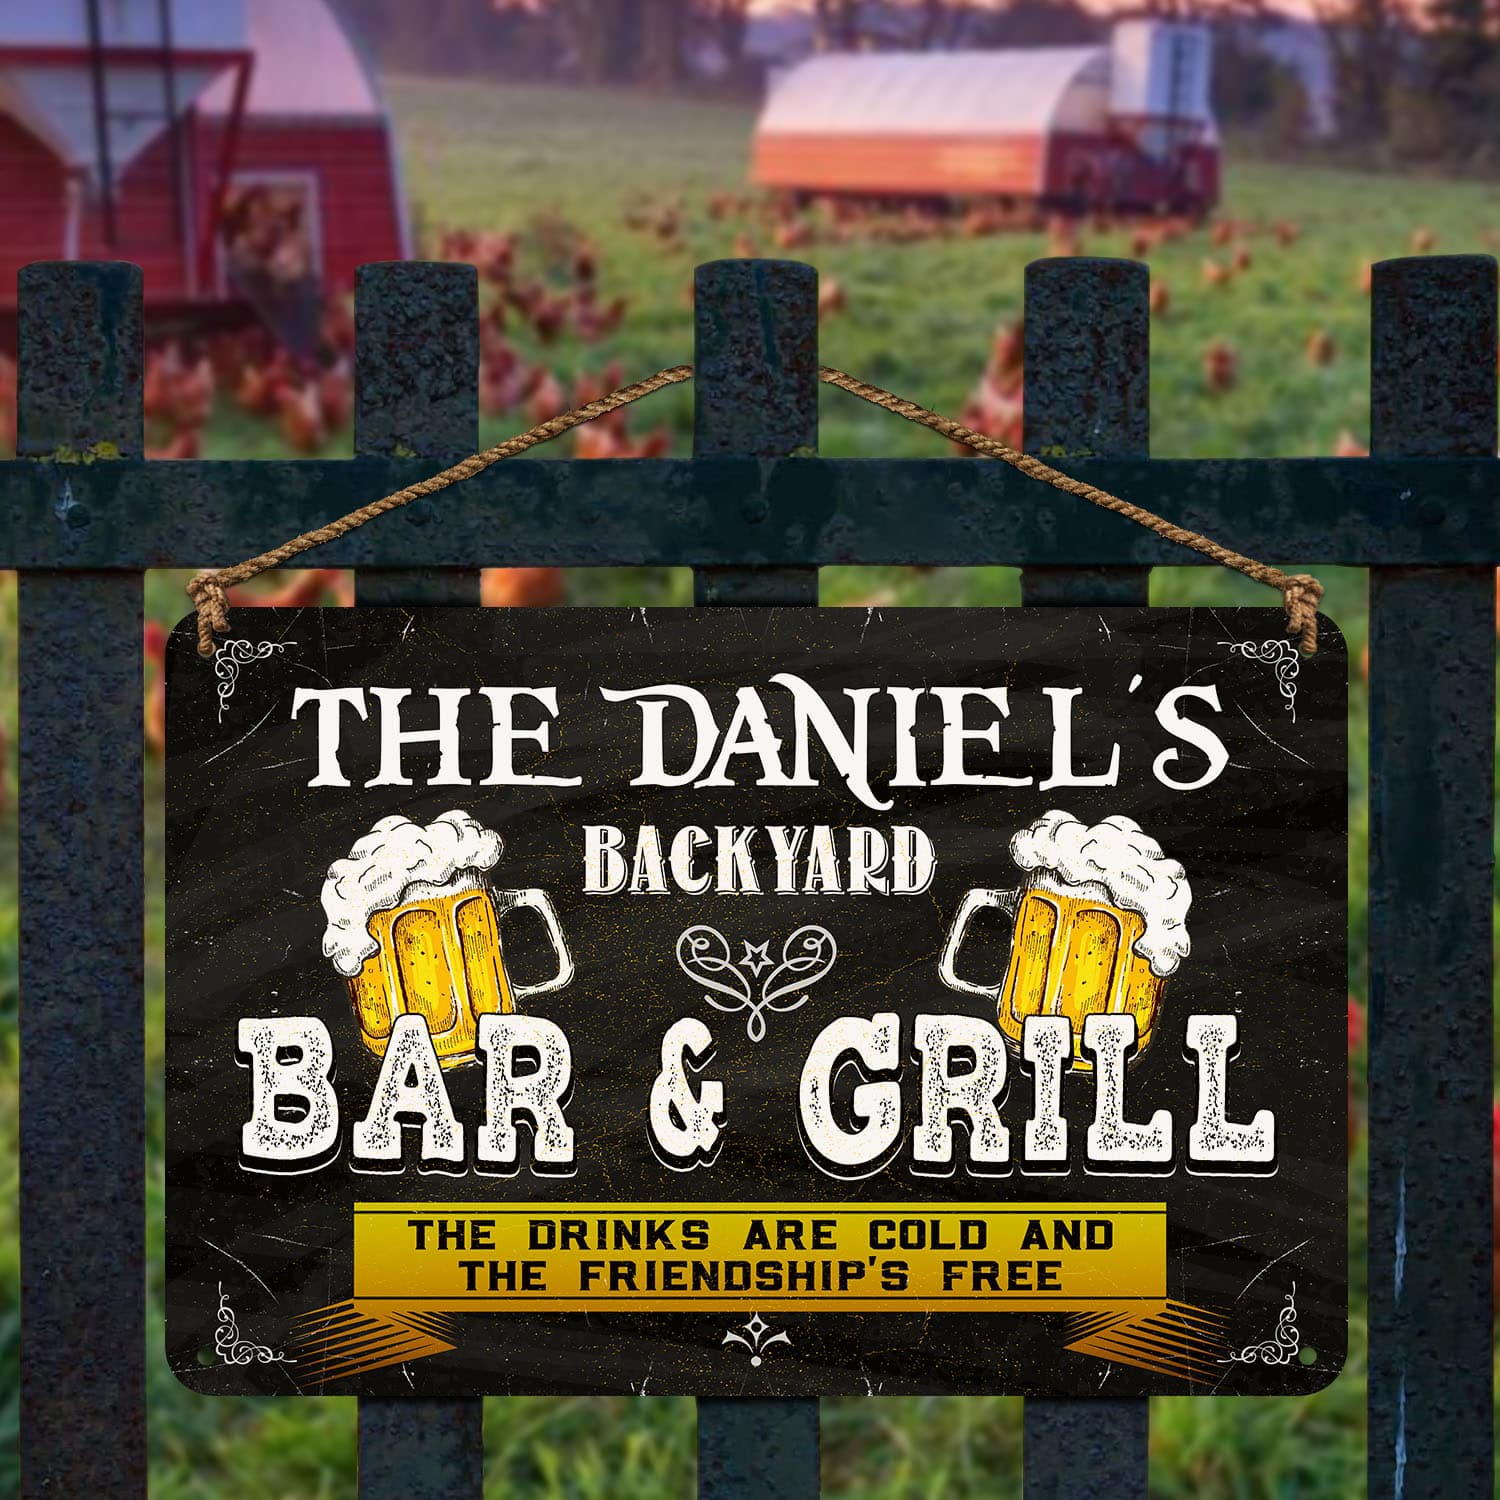 Personalized Backyard Bar And Grill The Drinks Are Cold And The Friendship’s Free Metal Sign – Indoor Outdoor Decor